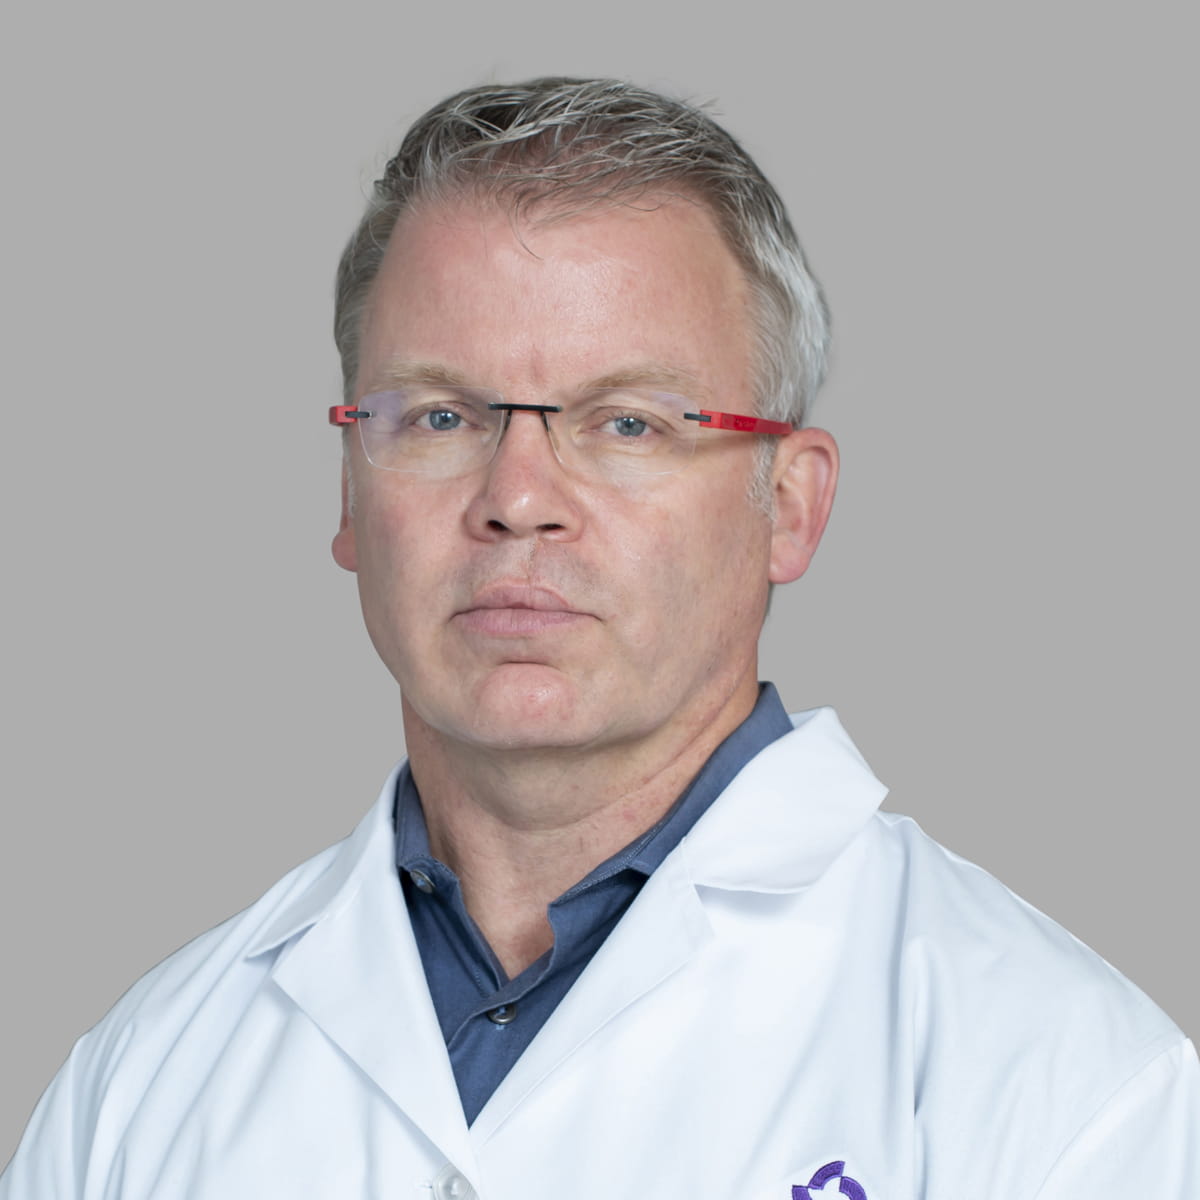 A friendly image of Eric Steenlage, MD